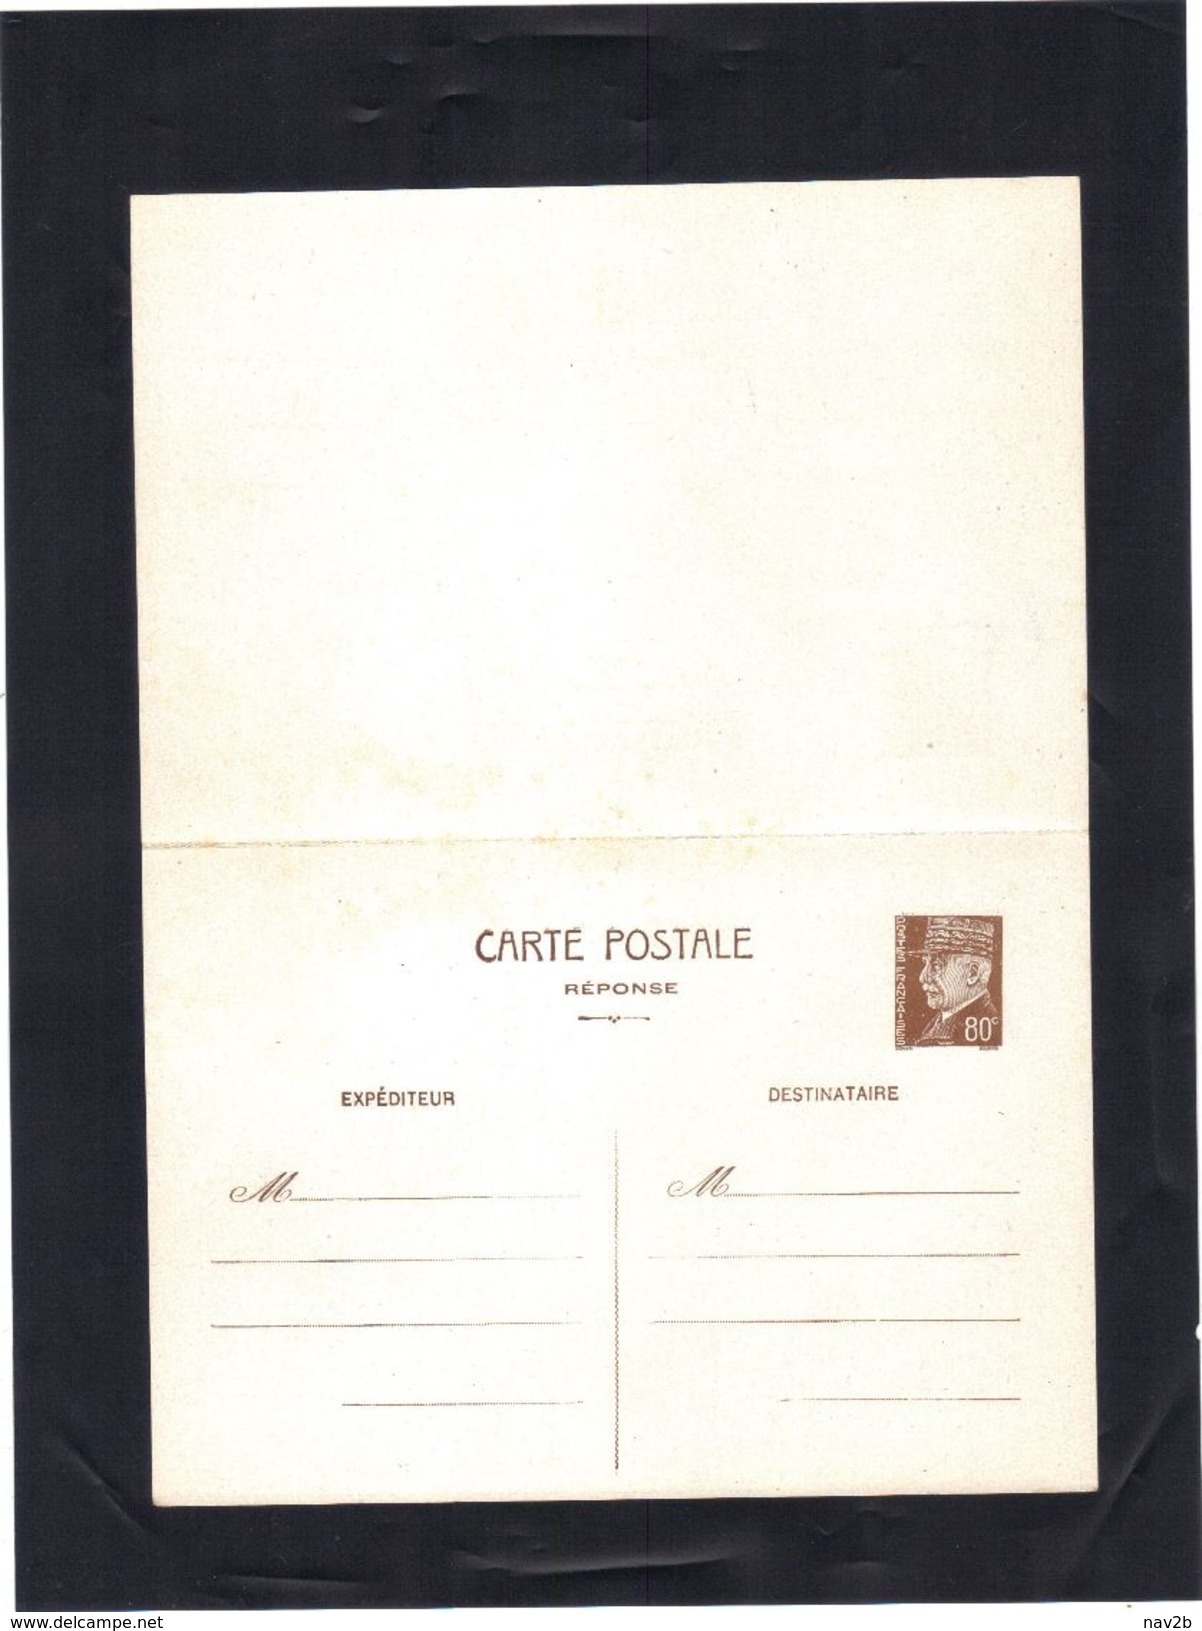 Entier Carte Postale Pétain 80 Cts .  REPONSE  PAYEE .  Neuve . - Standard Postcards & Stamped On Demand (before 1995)